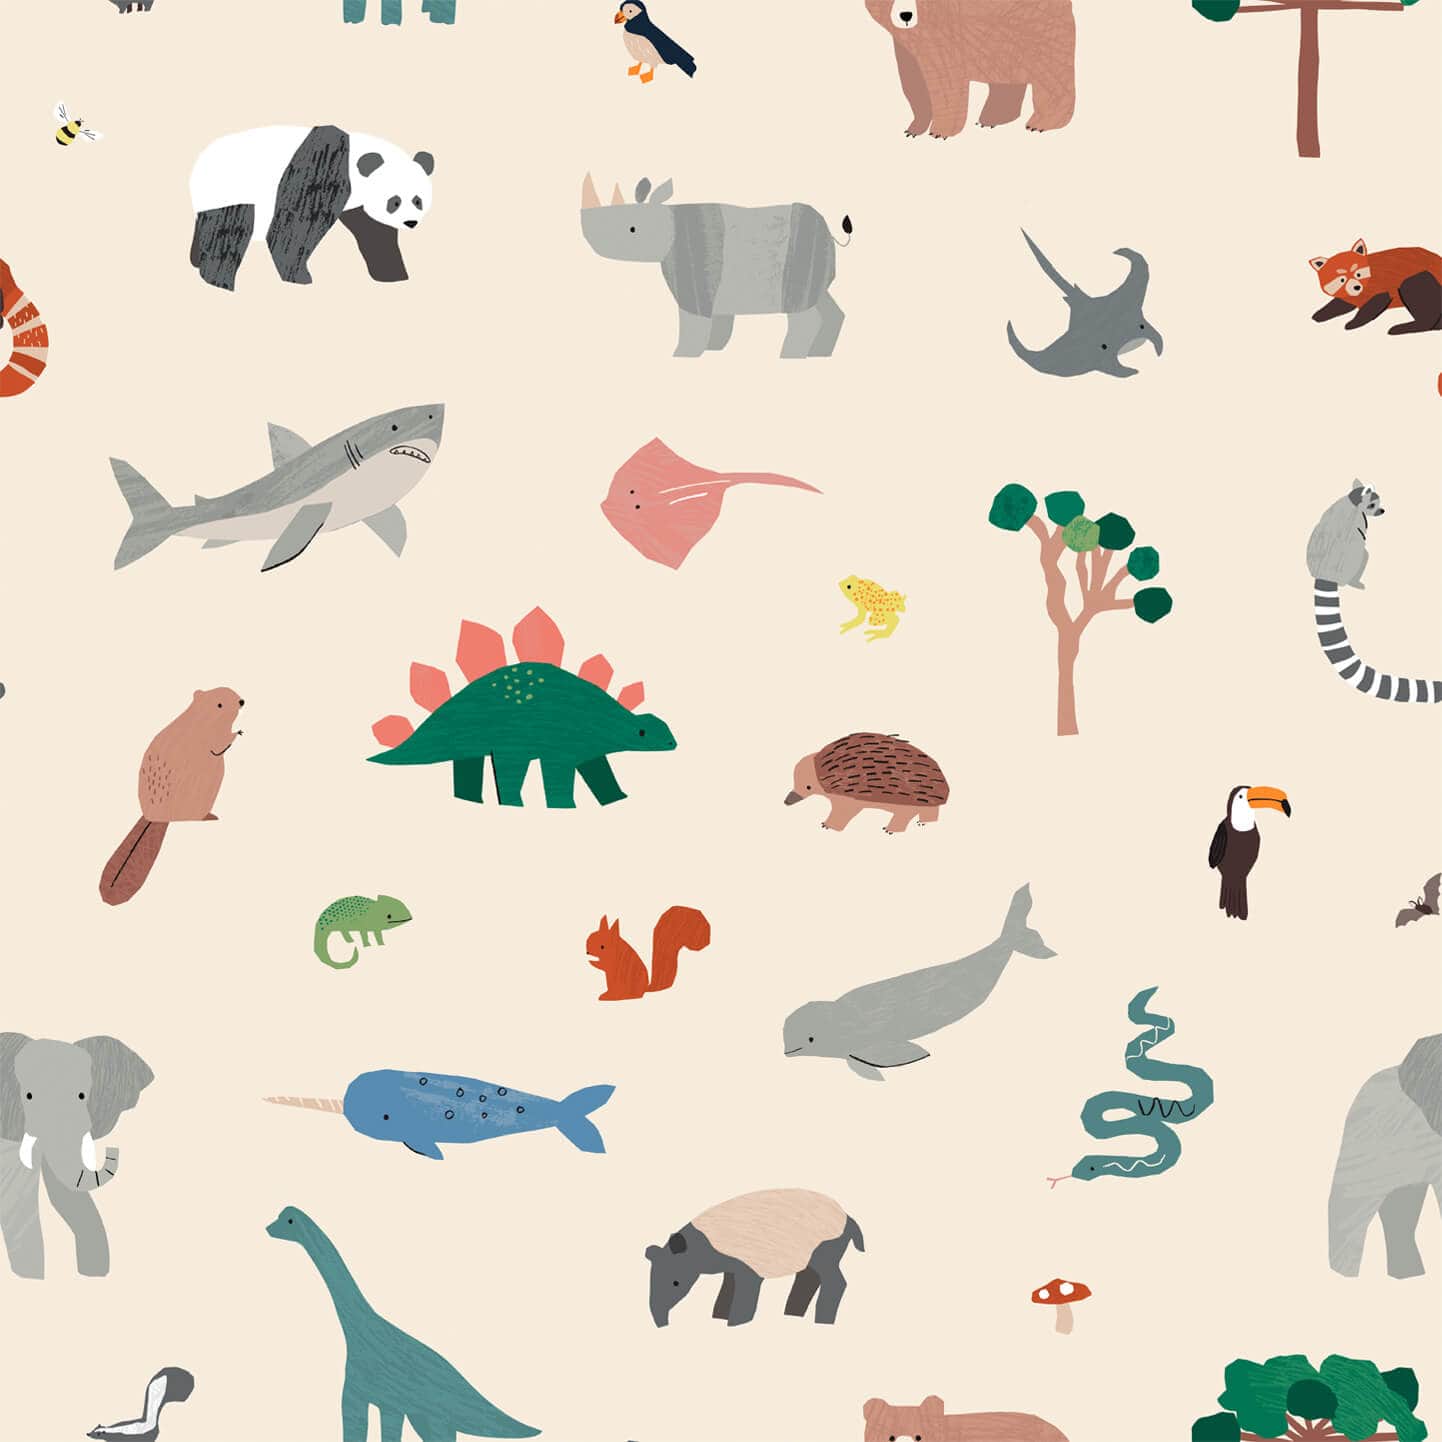 Wallpaper of multiple animals such as Pandas, Rhinos, Sharks, Dinosaurs, Squirrels, Frogs, Manta rays, Bears, Chameleons and trees with a cream background.